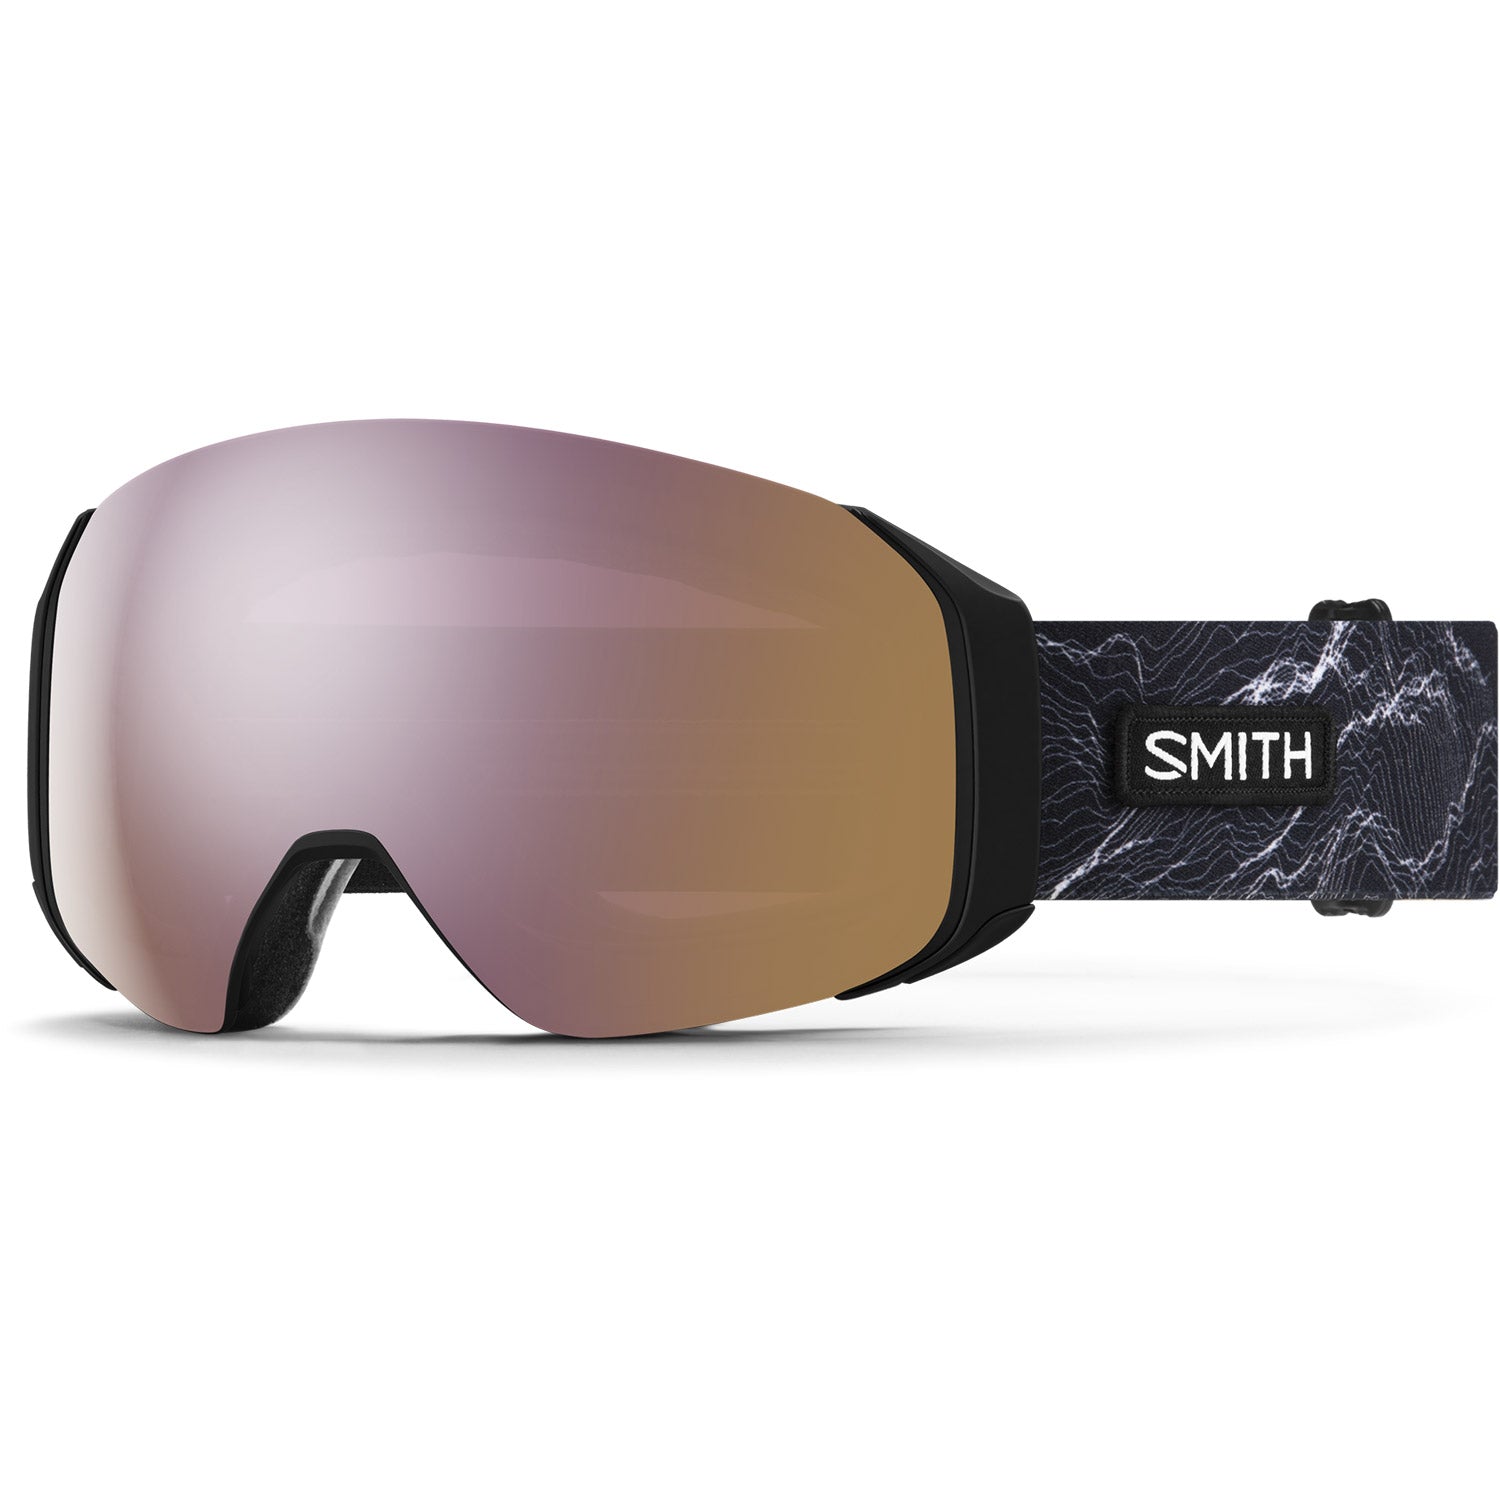 4D MAG S Snow Goggle